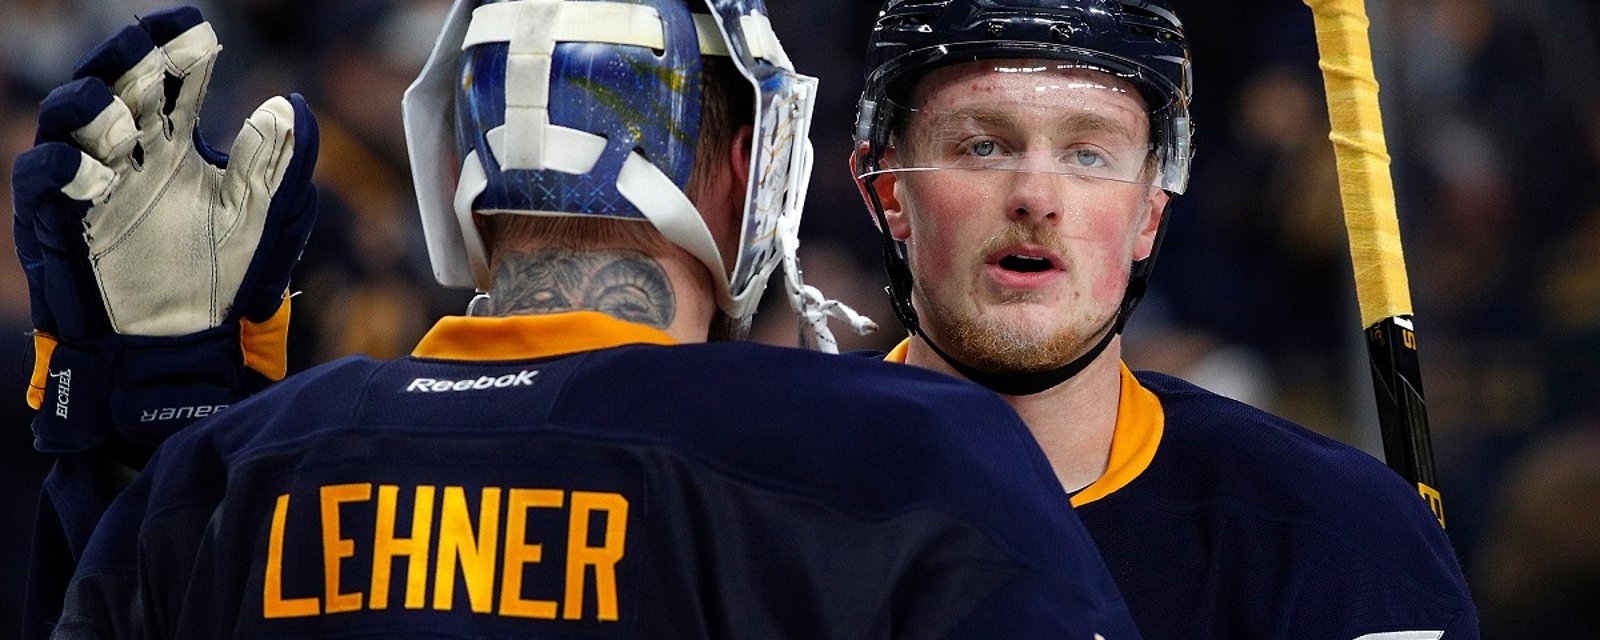 Robin Lehner rips the NHLPA, Buffalo Sabres and journalists over the Jack Eichel situation.